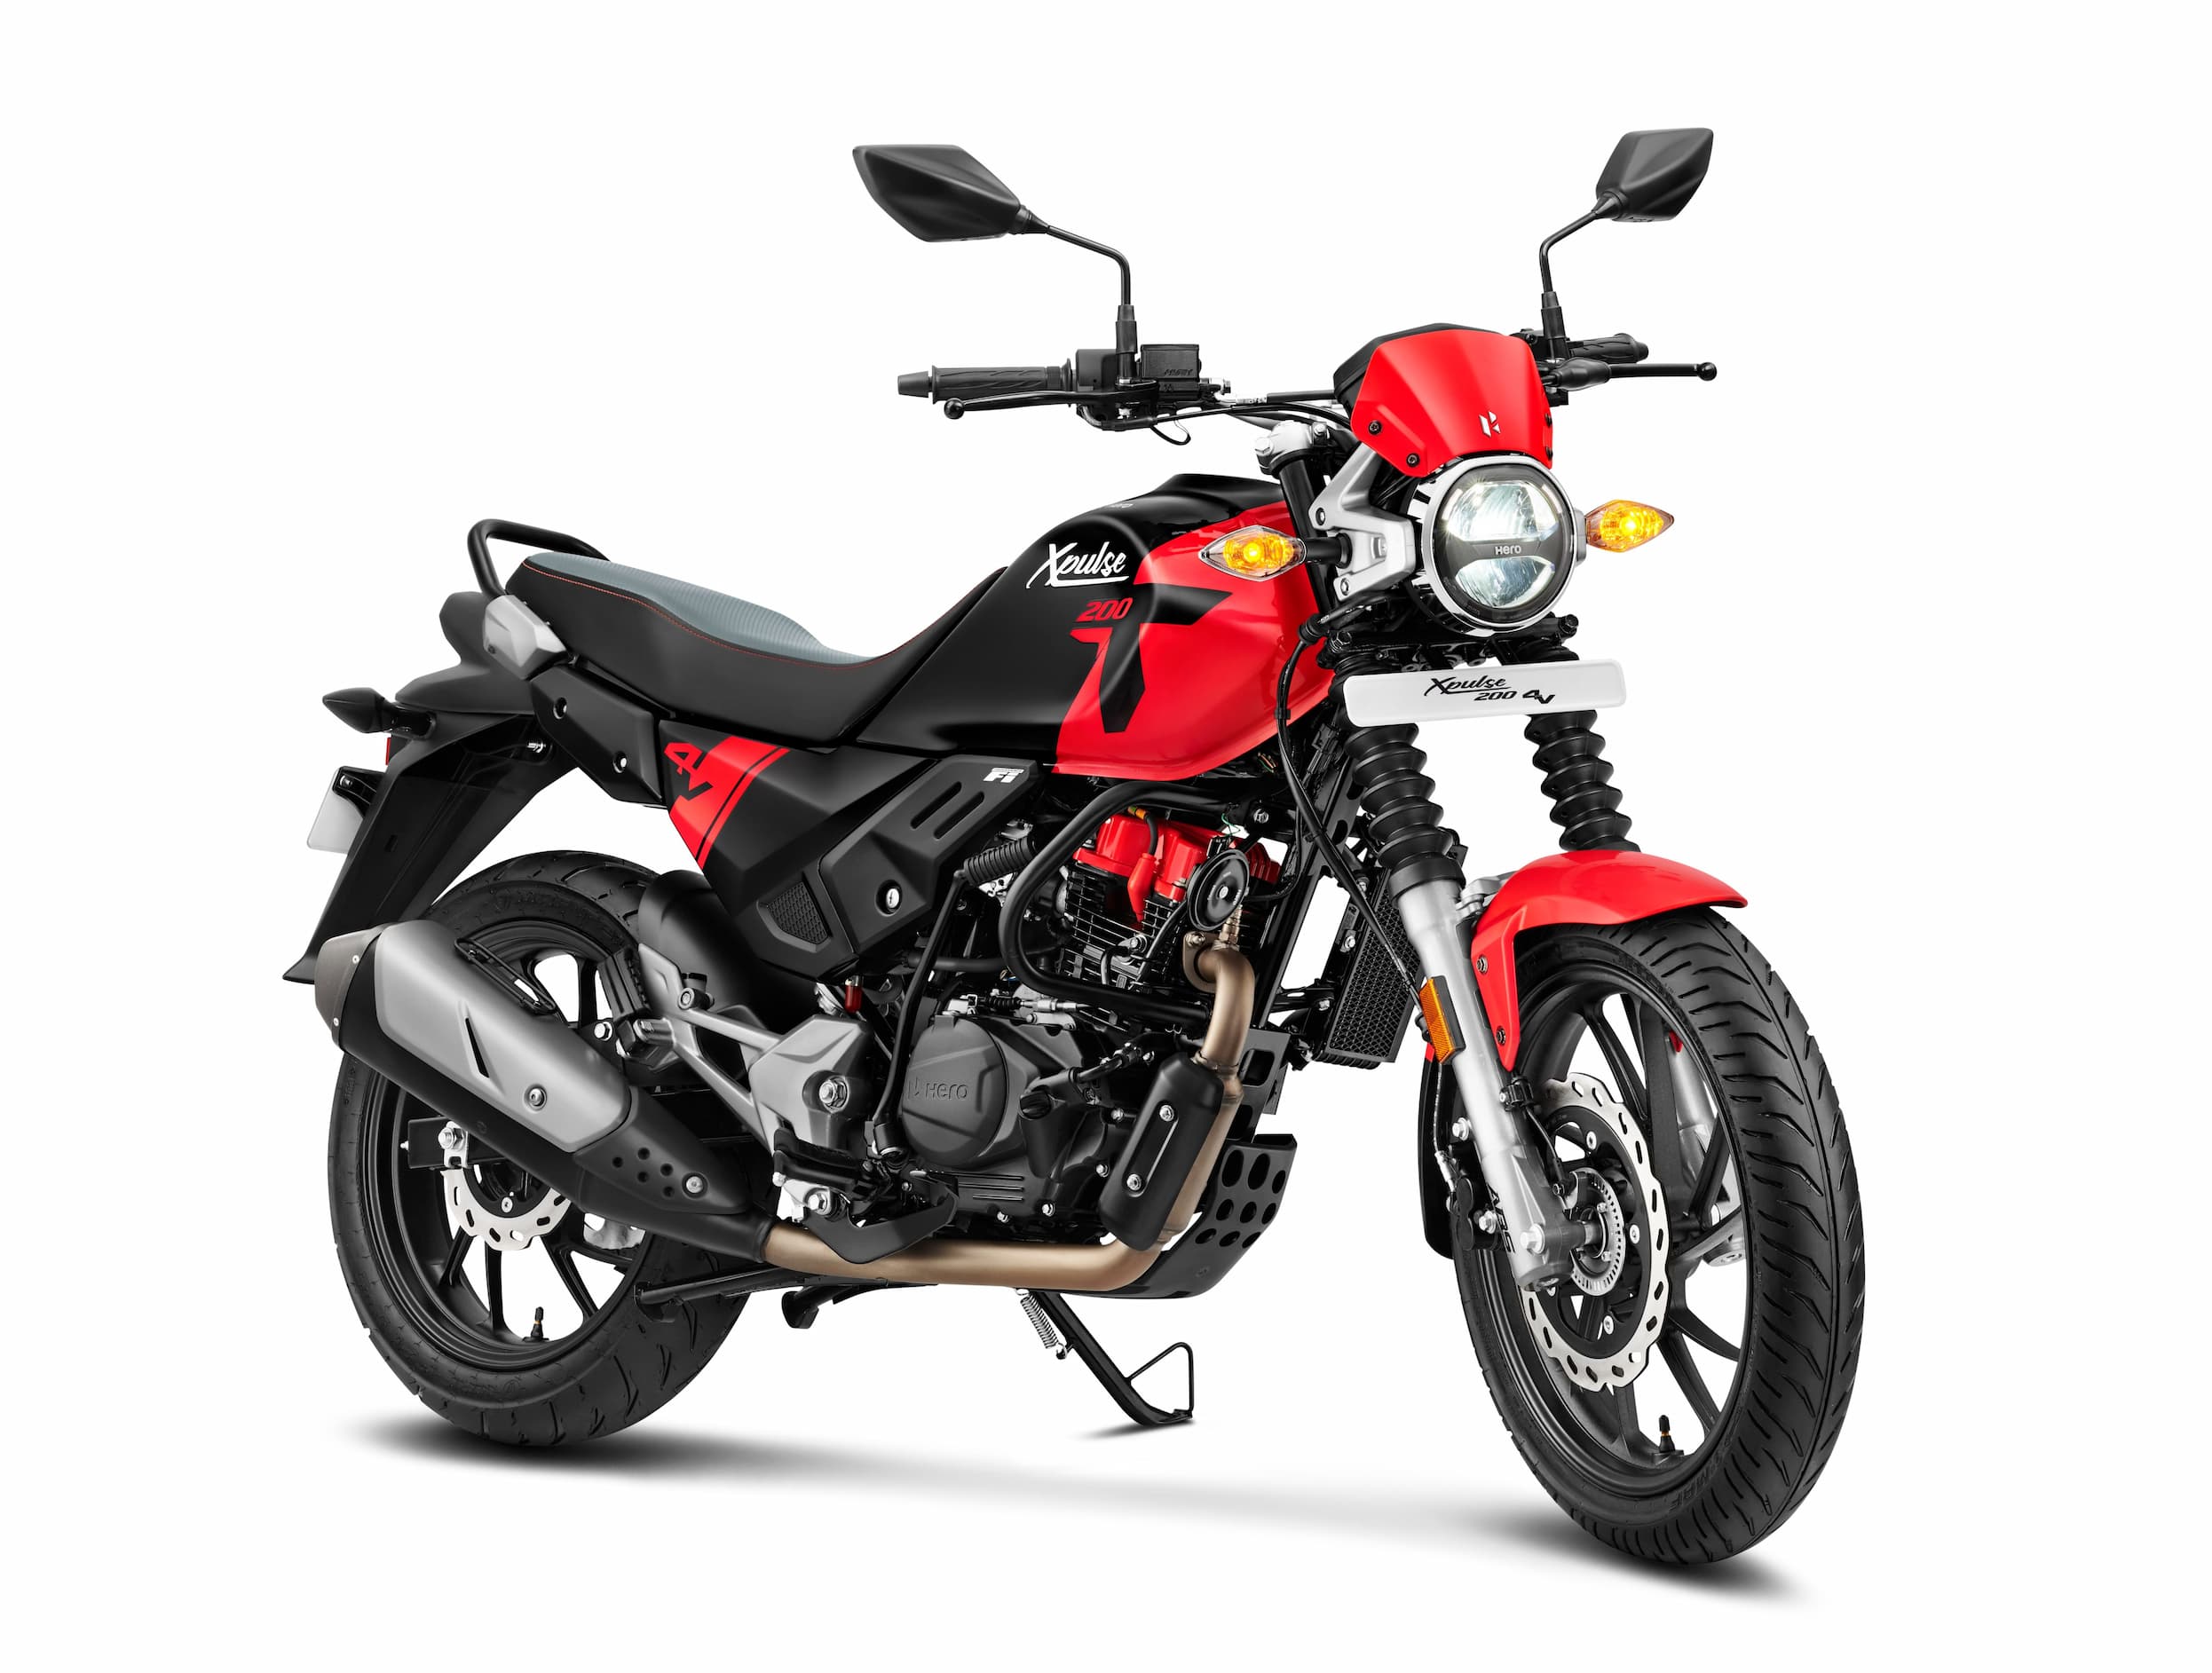 2023 Hero XPulse 200T 4Valve launched in India at Rs 1.25 lakhs GaadiKey